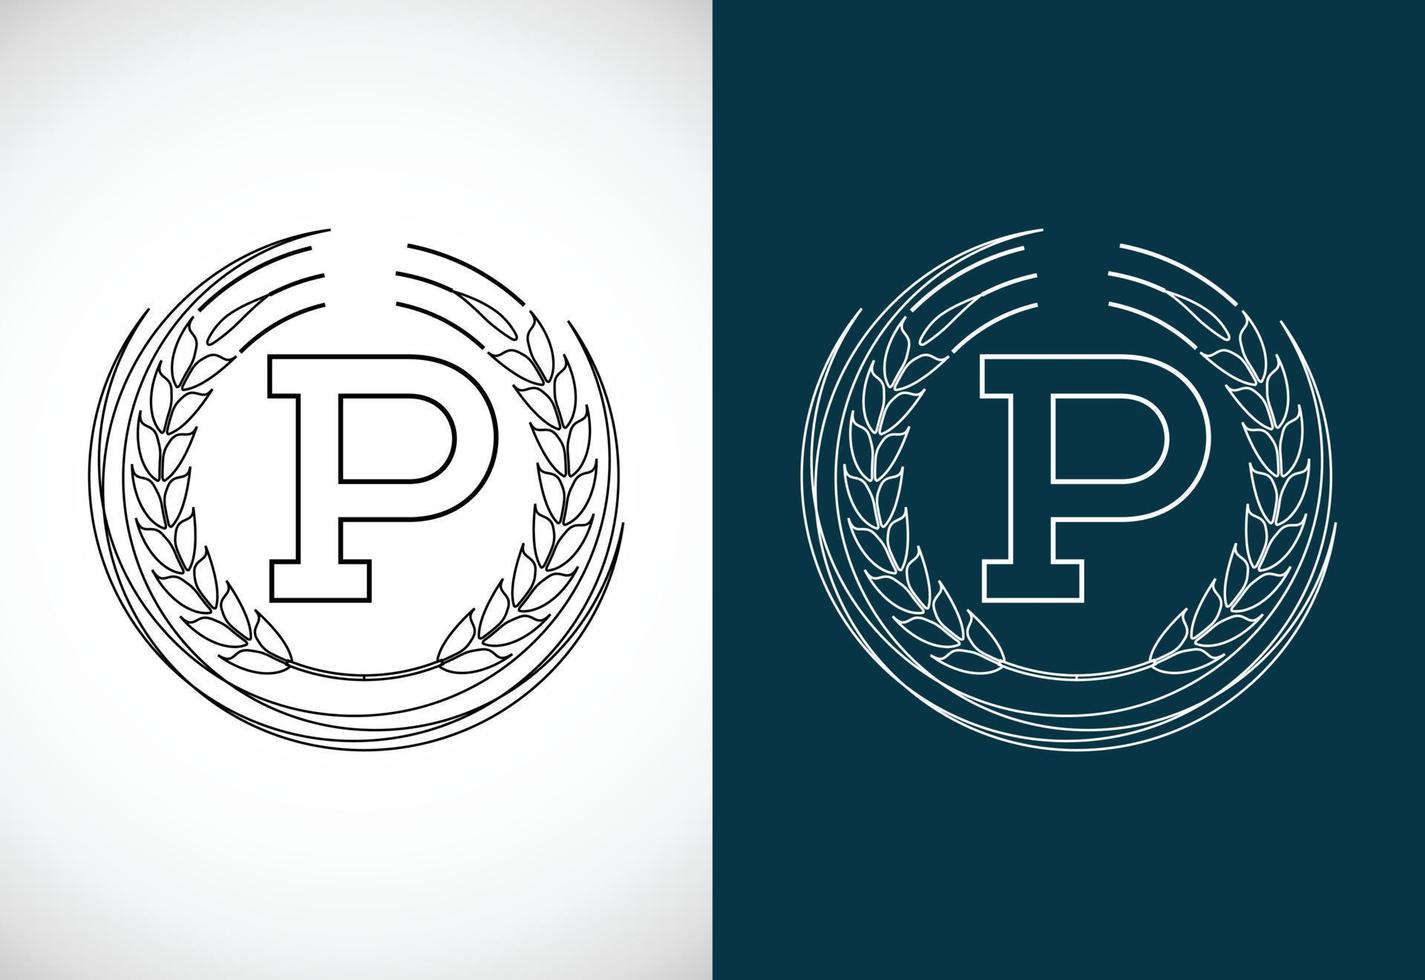 Initial letter P with wheat wreath. Organic wheat farming logo design concept. Agriculture logo. vector